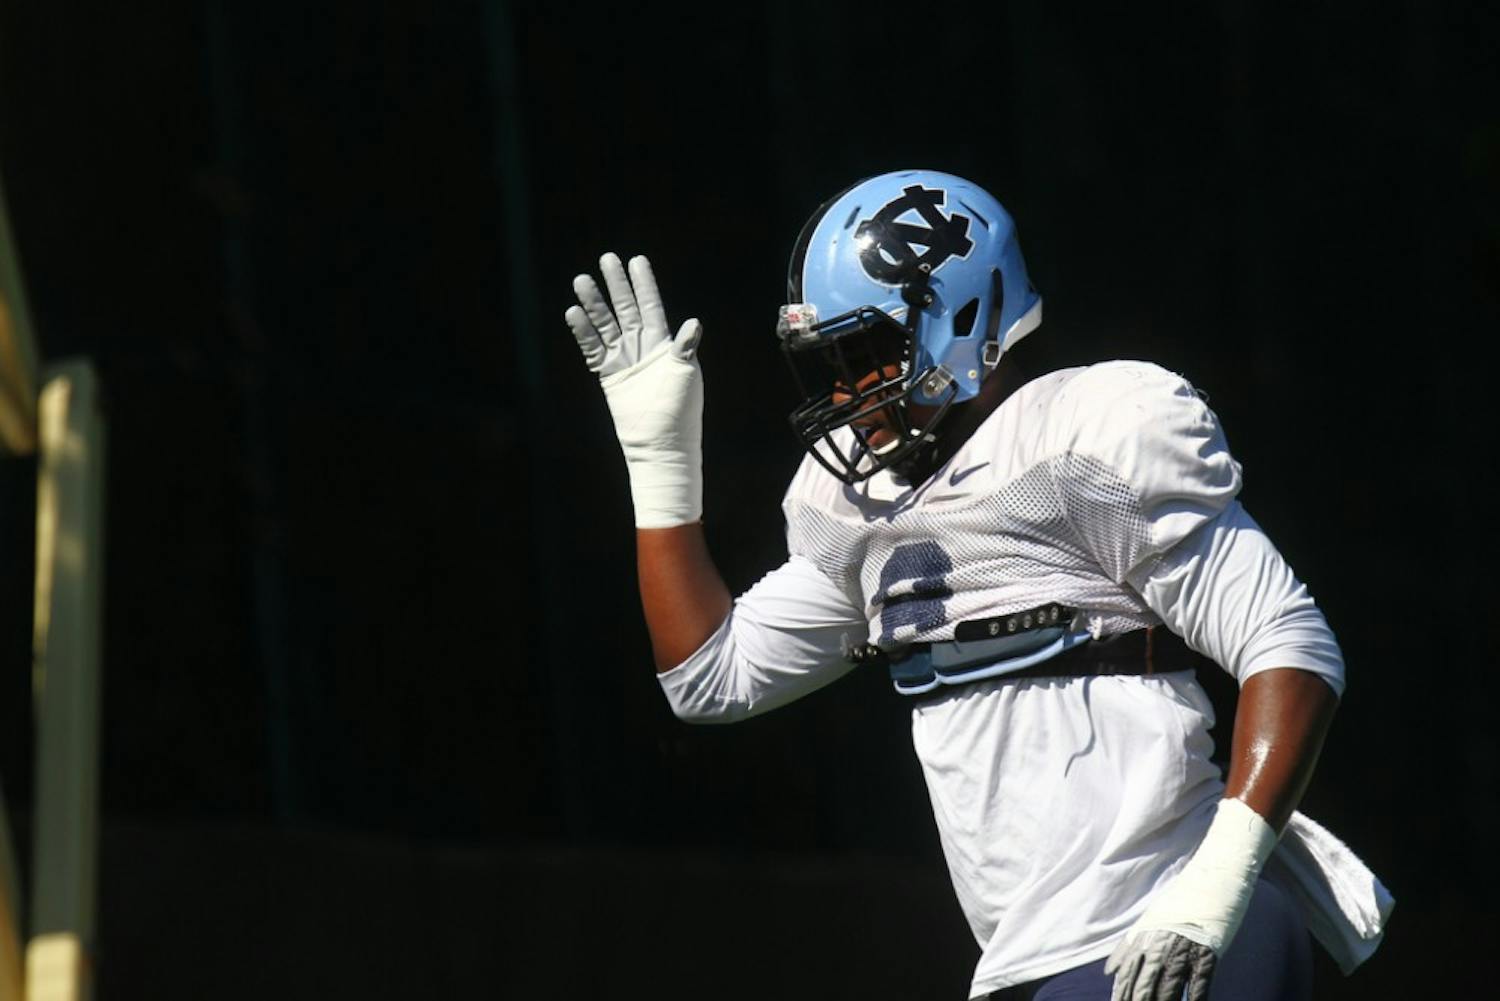 The UNC football team practices at Navy Field on August 14. 